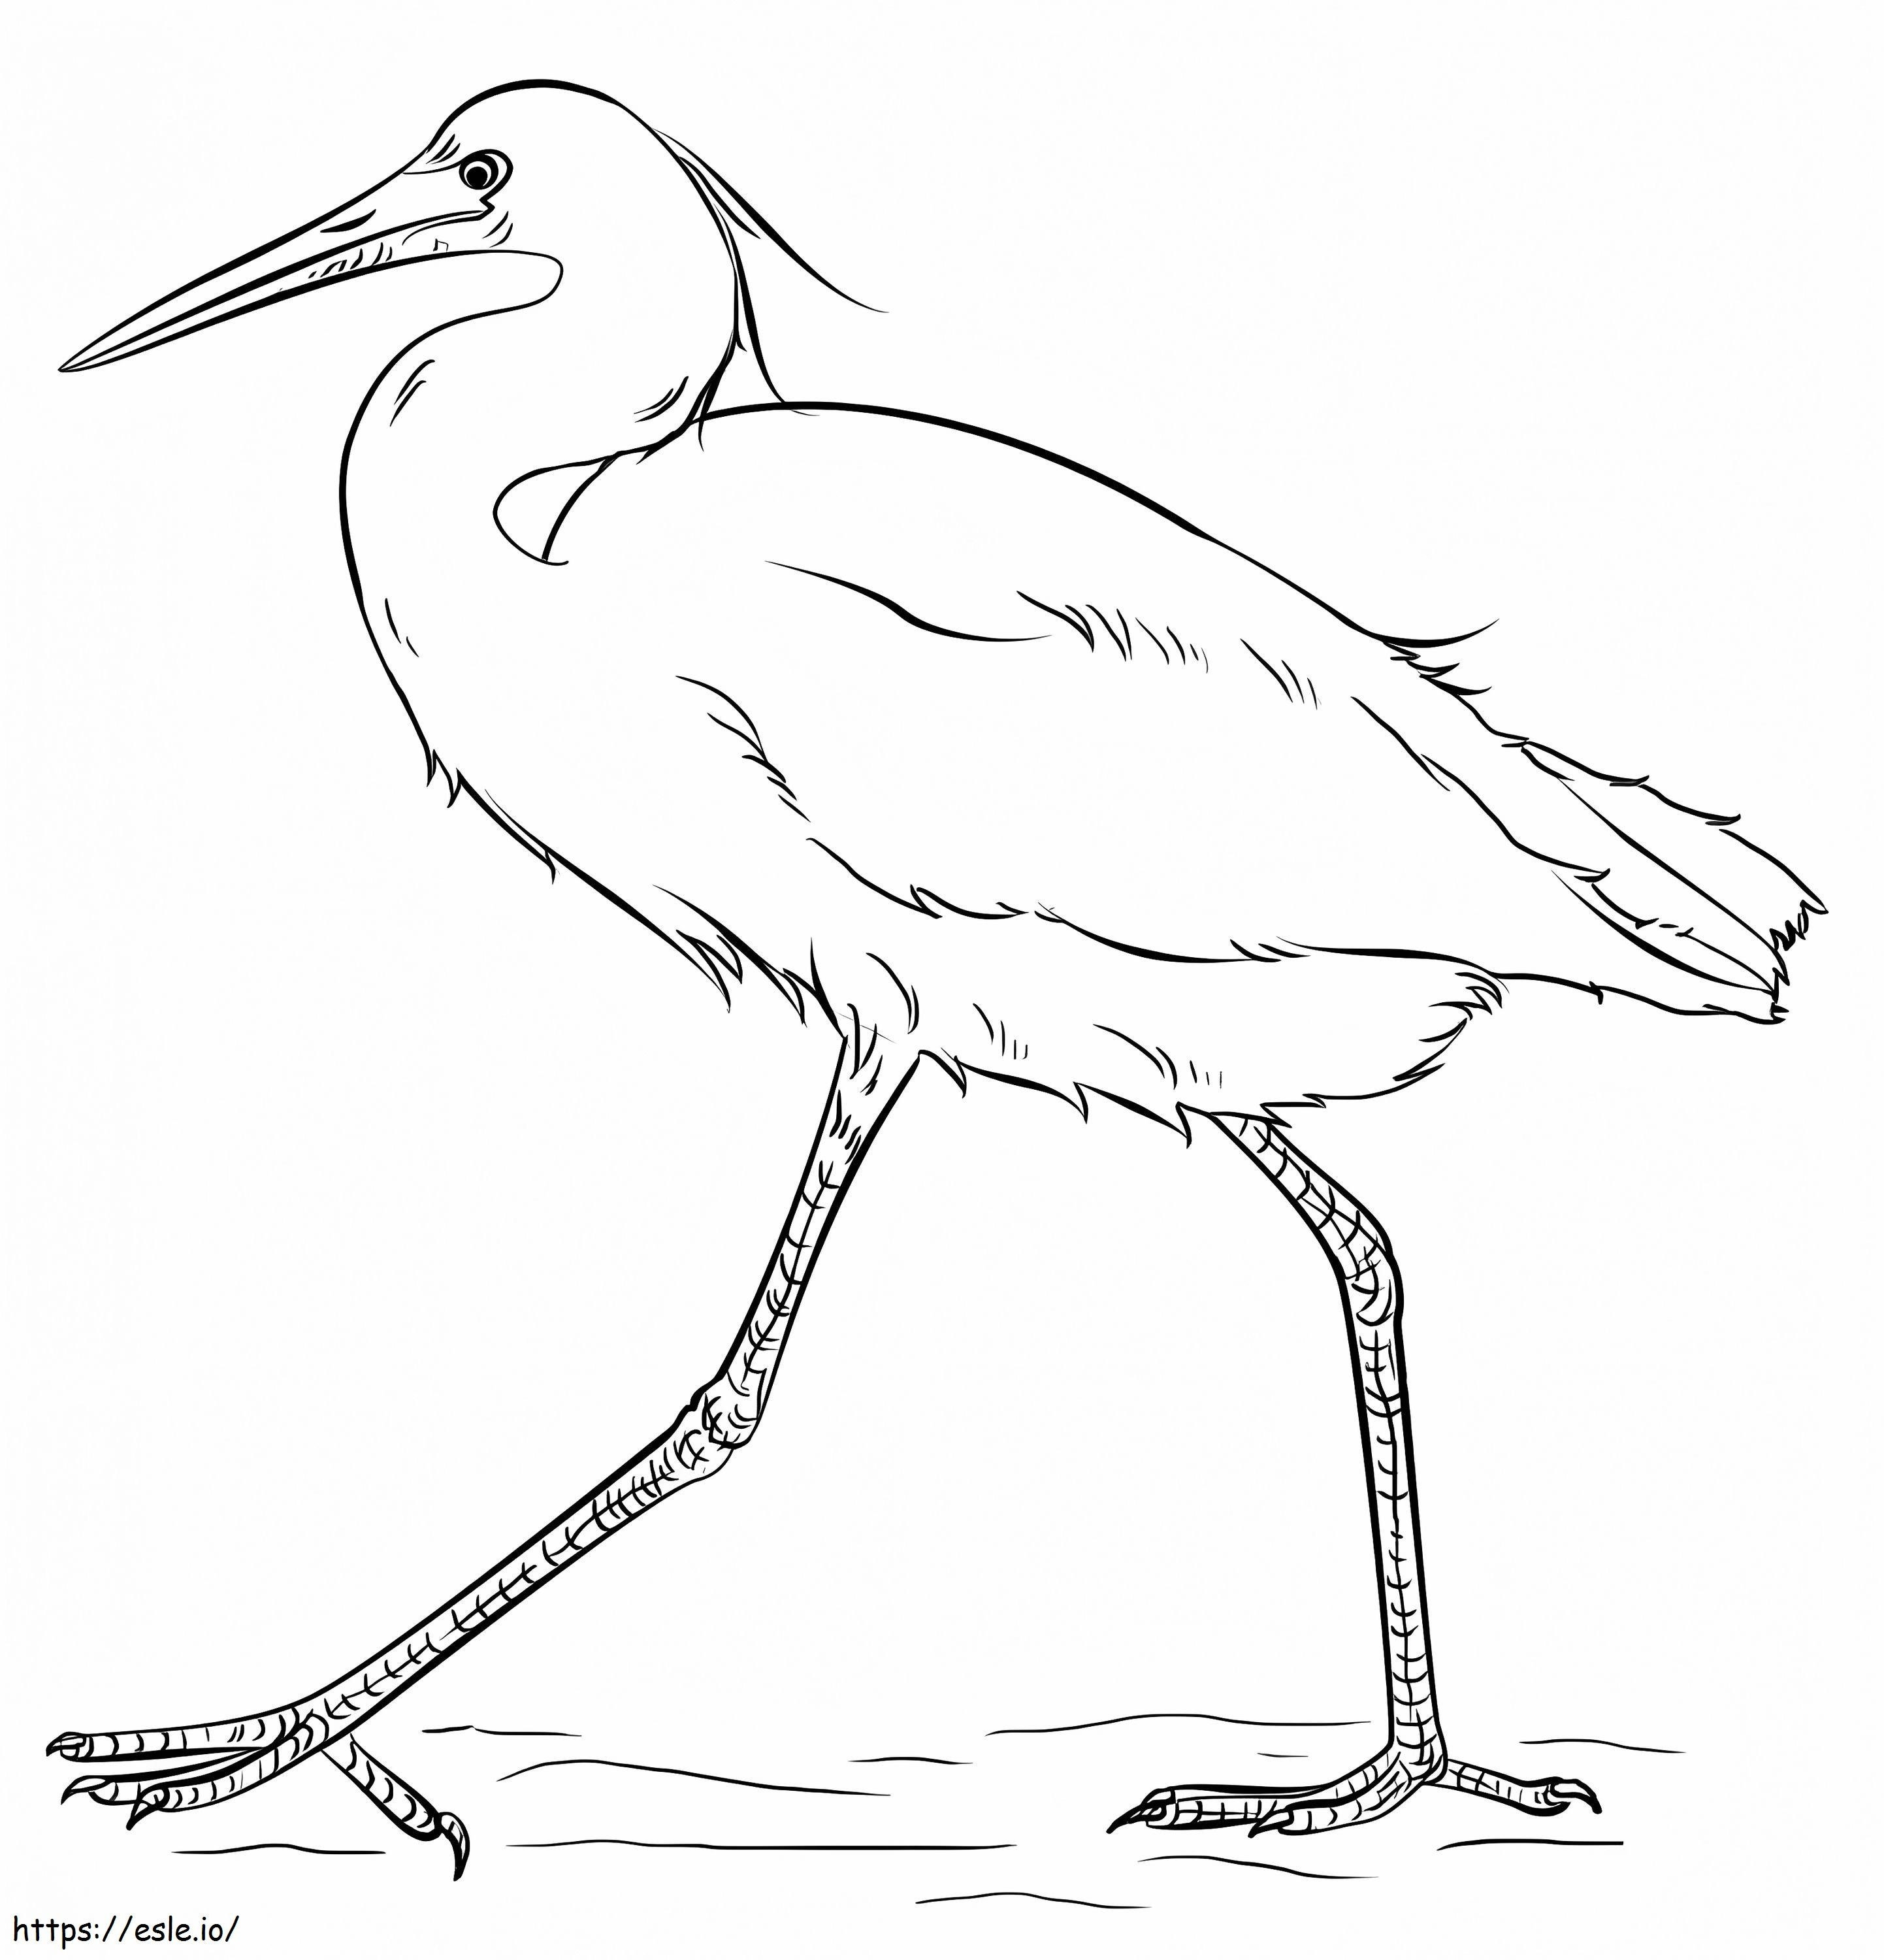 Snowy Egret 1 coloring page